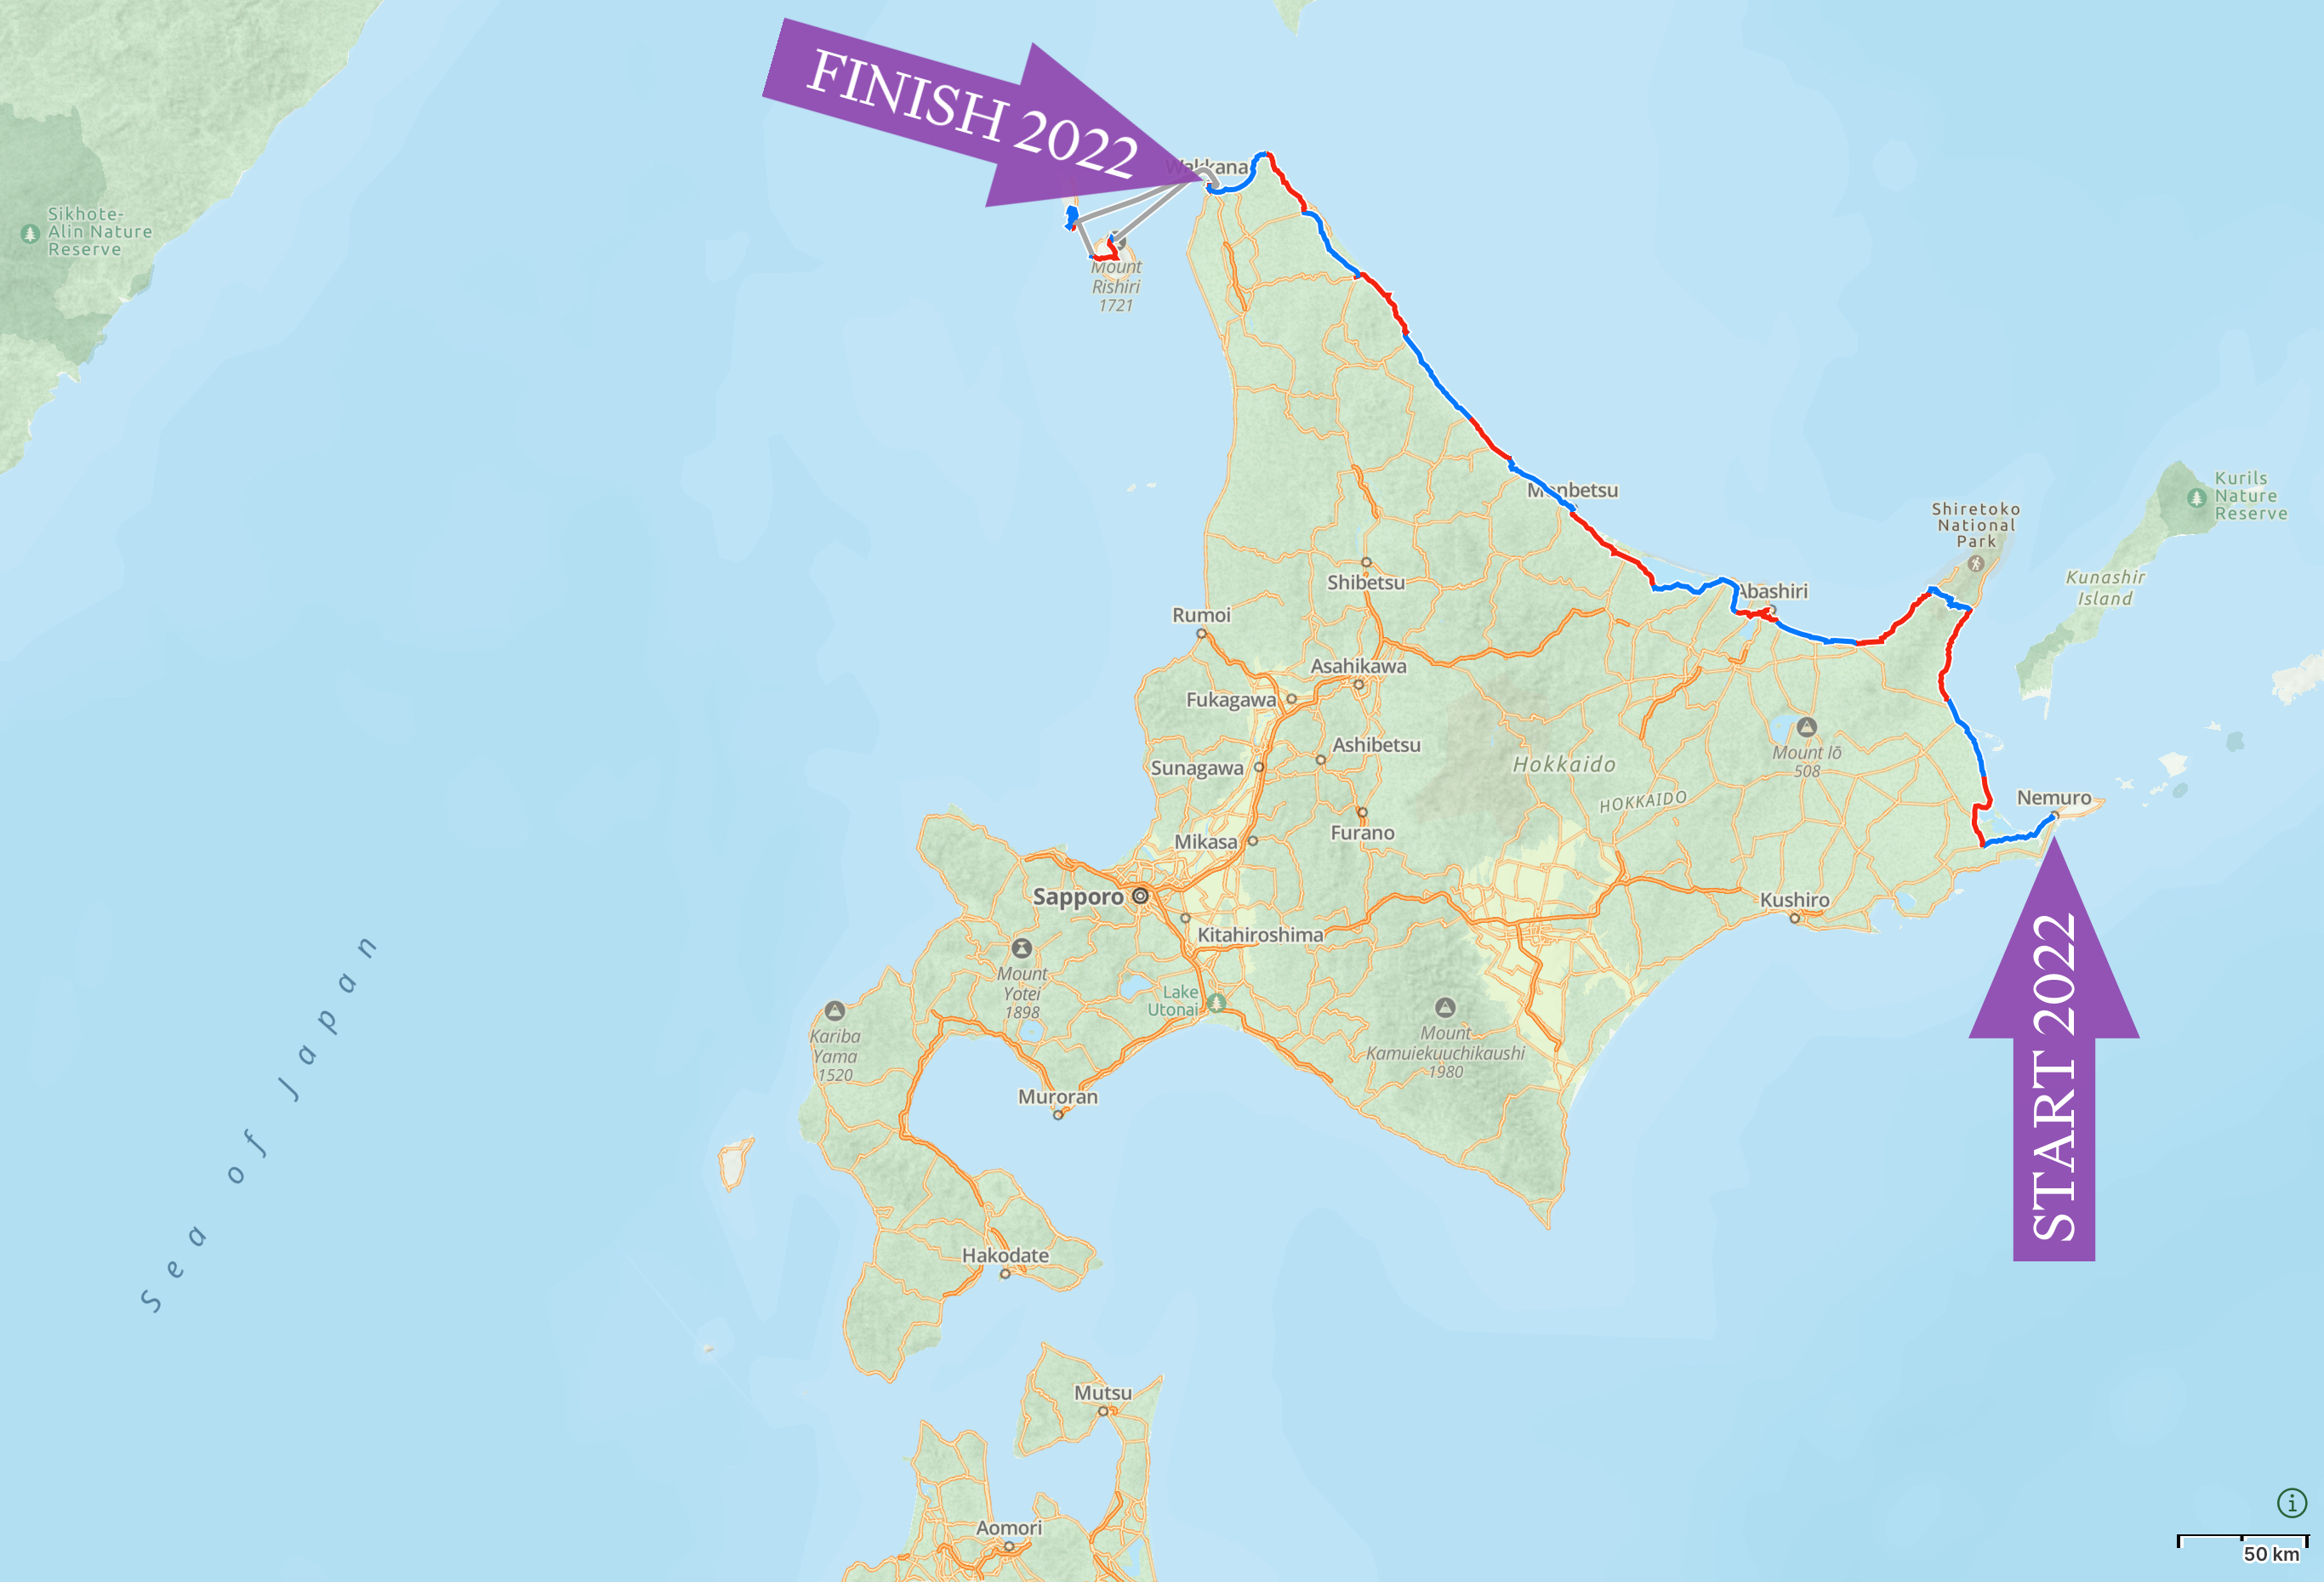 Map of Hokkaido with the route I walked in 2012 highlighted.